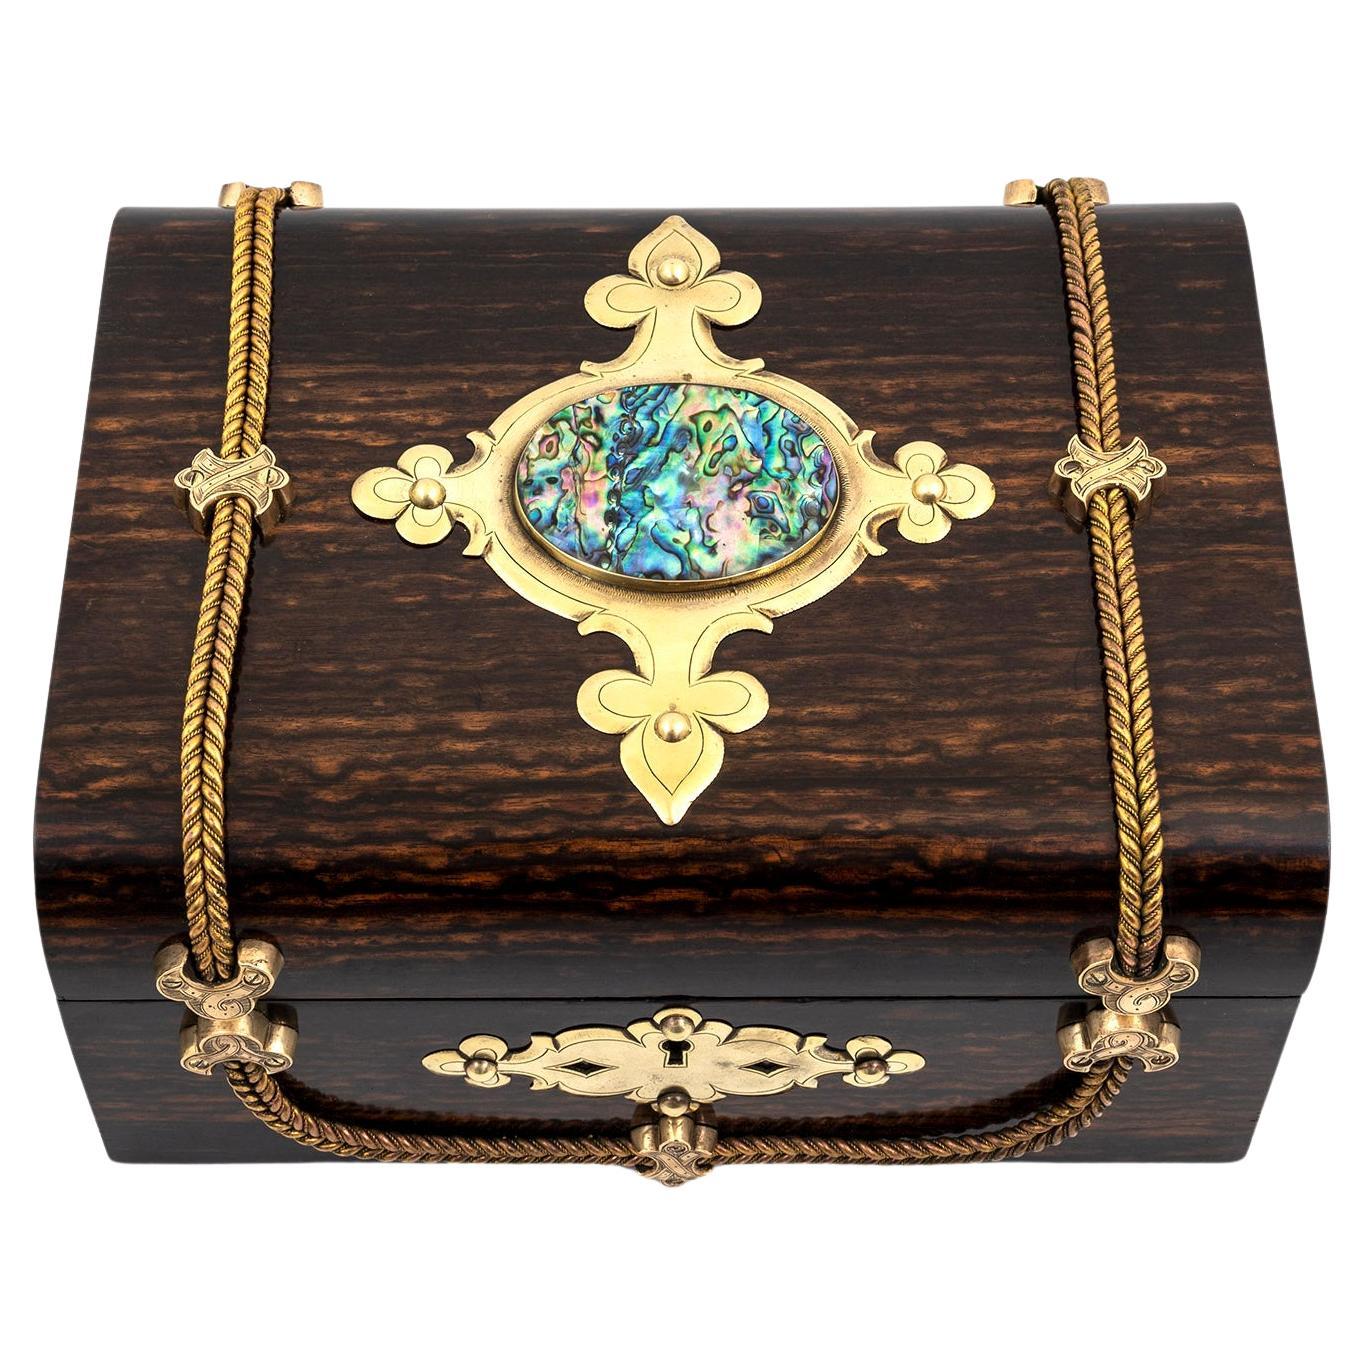 19th Century Antique Dome-Top Jewellery Box with Abalone Medallion